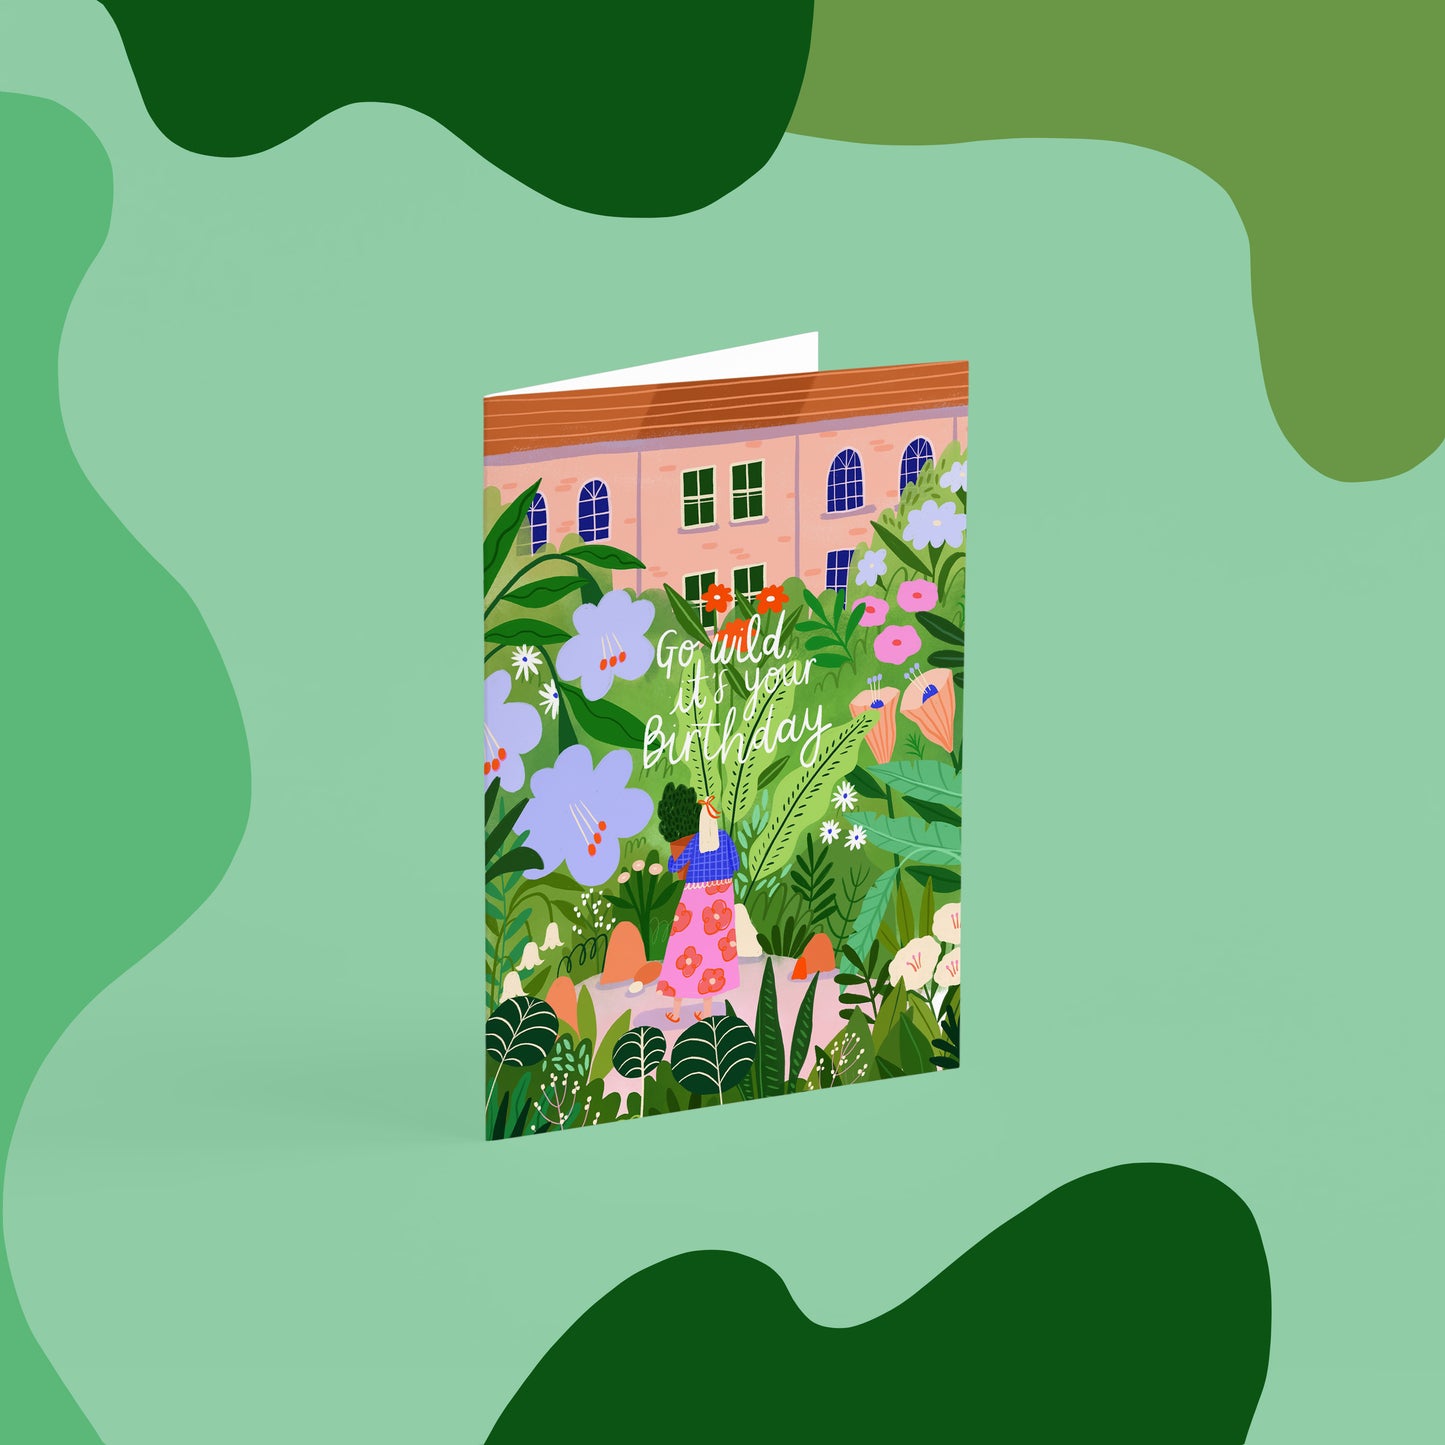 birthday card that reads ' go wild, it's your birthday'. the image is of a lady walking through a blooming garden with big flowers and plants and townhouses in the background, she is carrying a pot plant